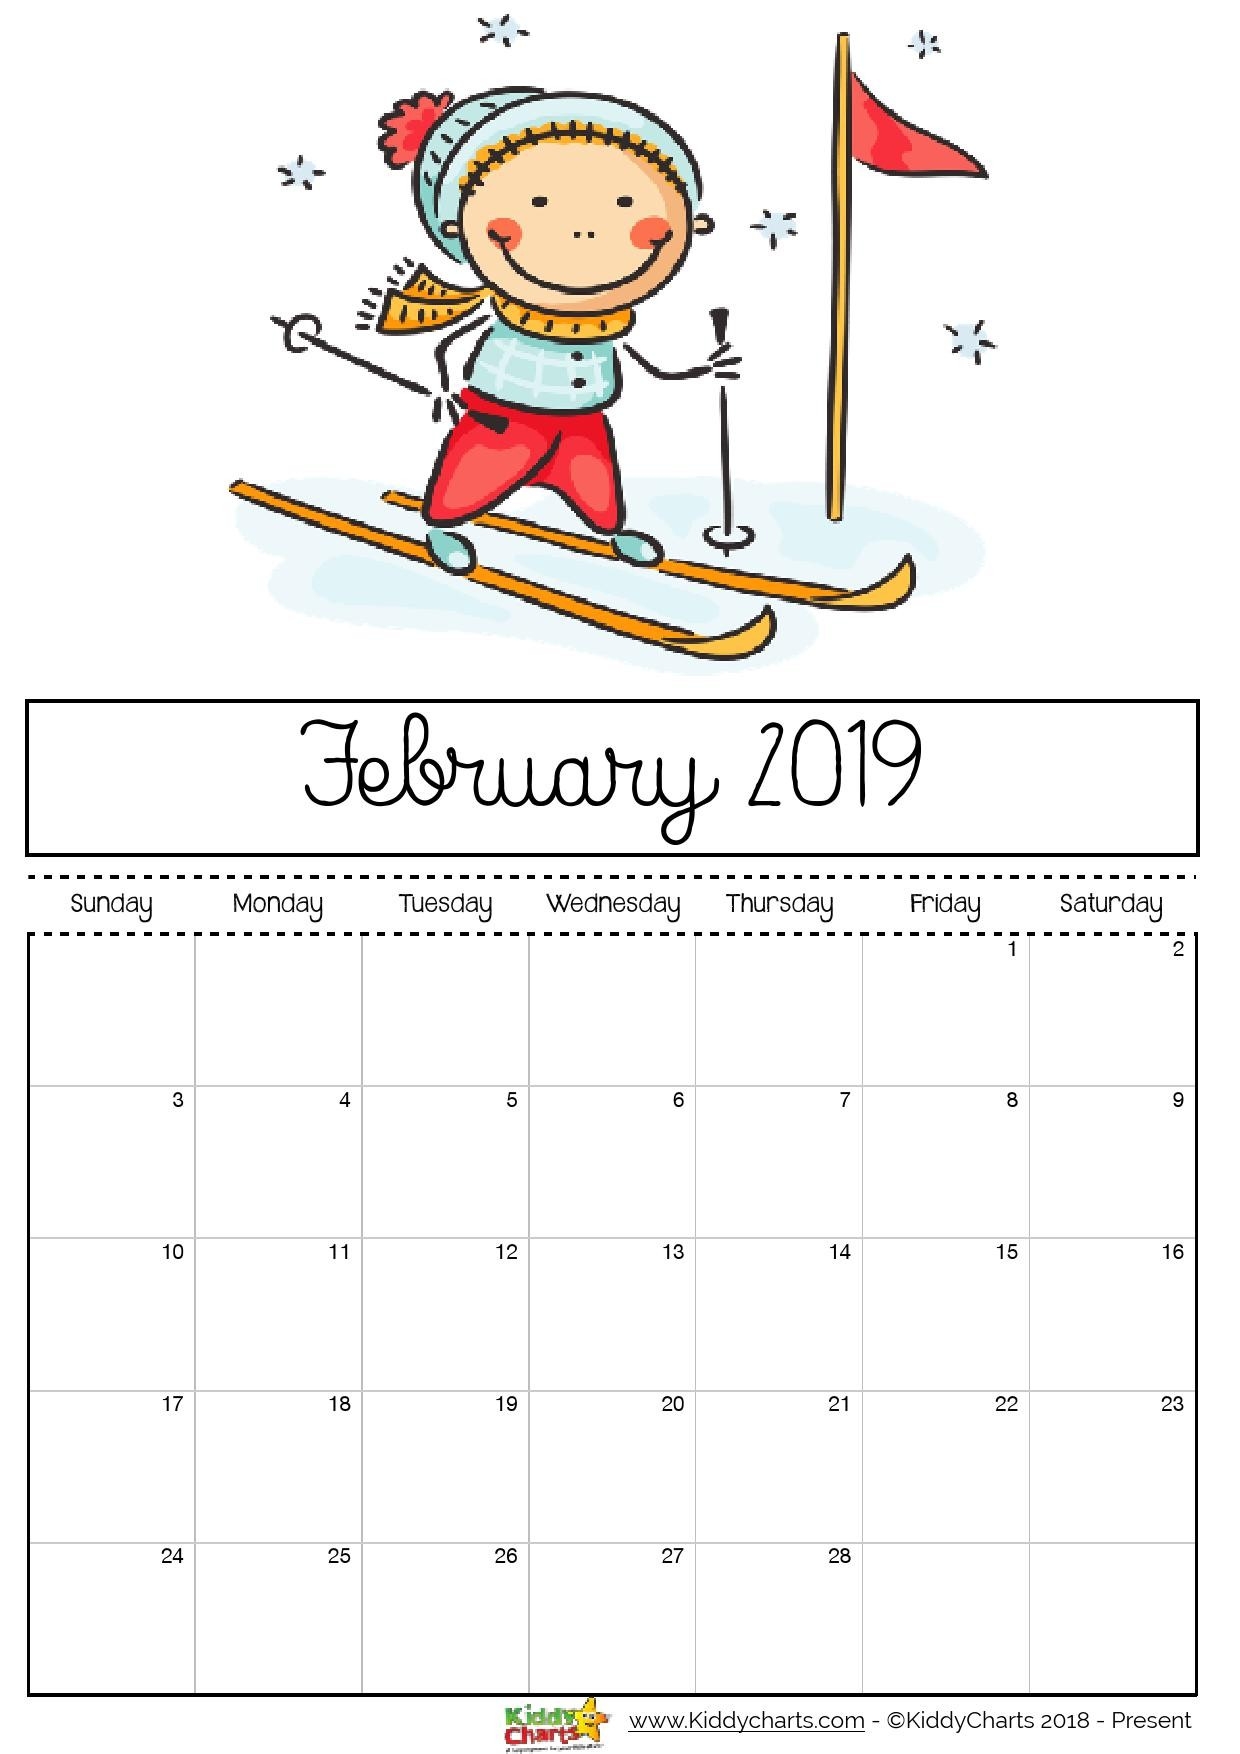 Free Printable 2019 Calendar - Print Yours Here | Kiddycharts-Images Of Free Printable Calendar Templates For Kids Monday To Friday Only